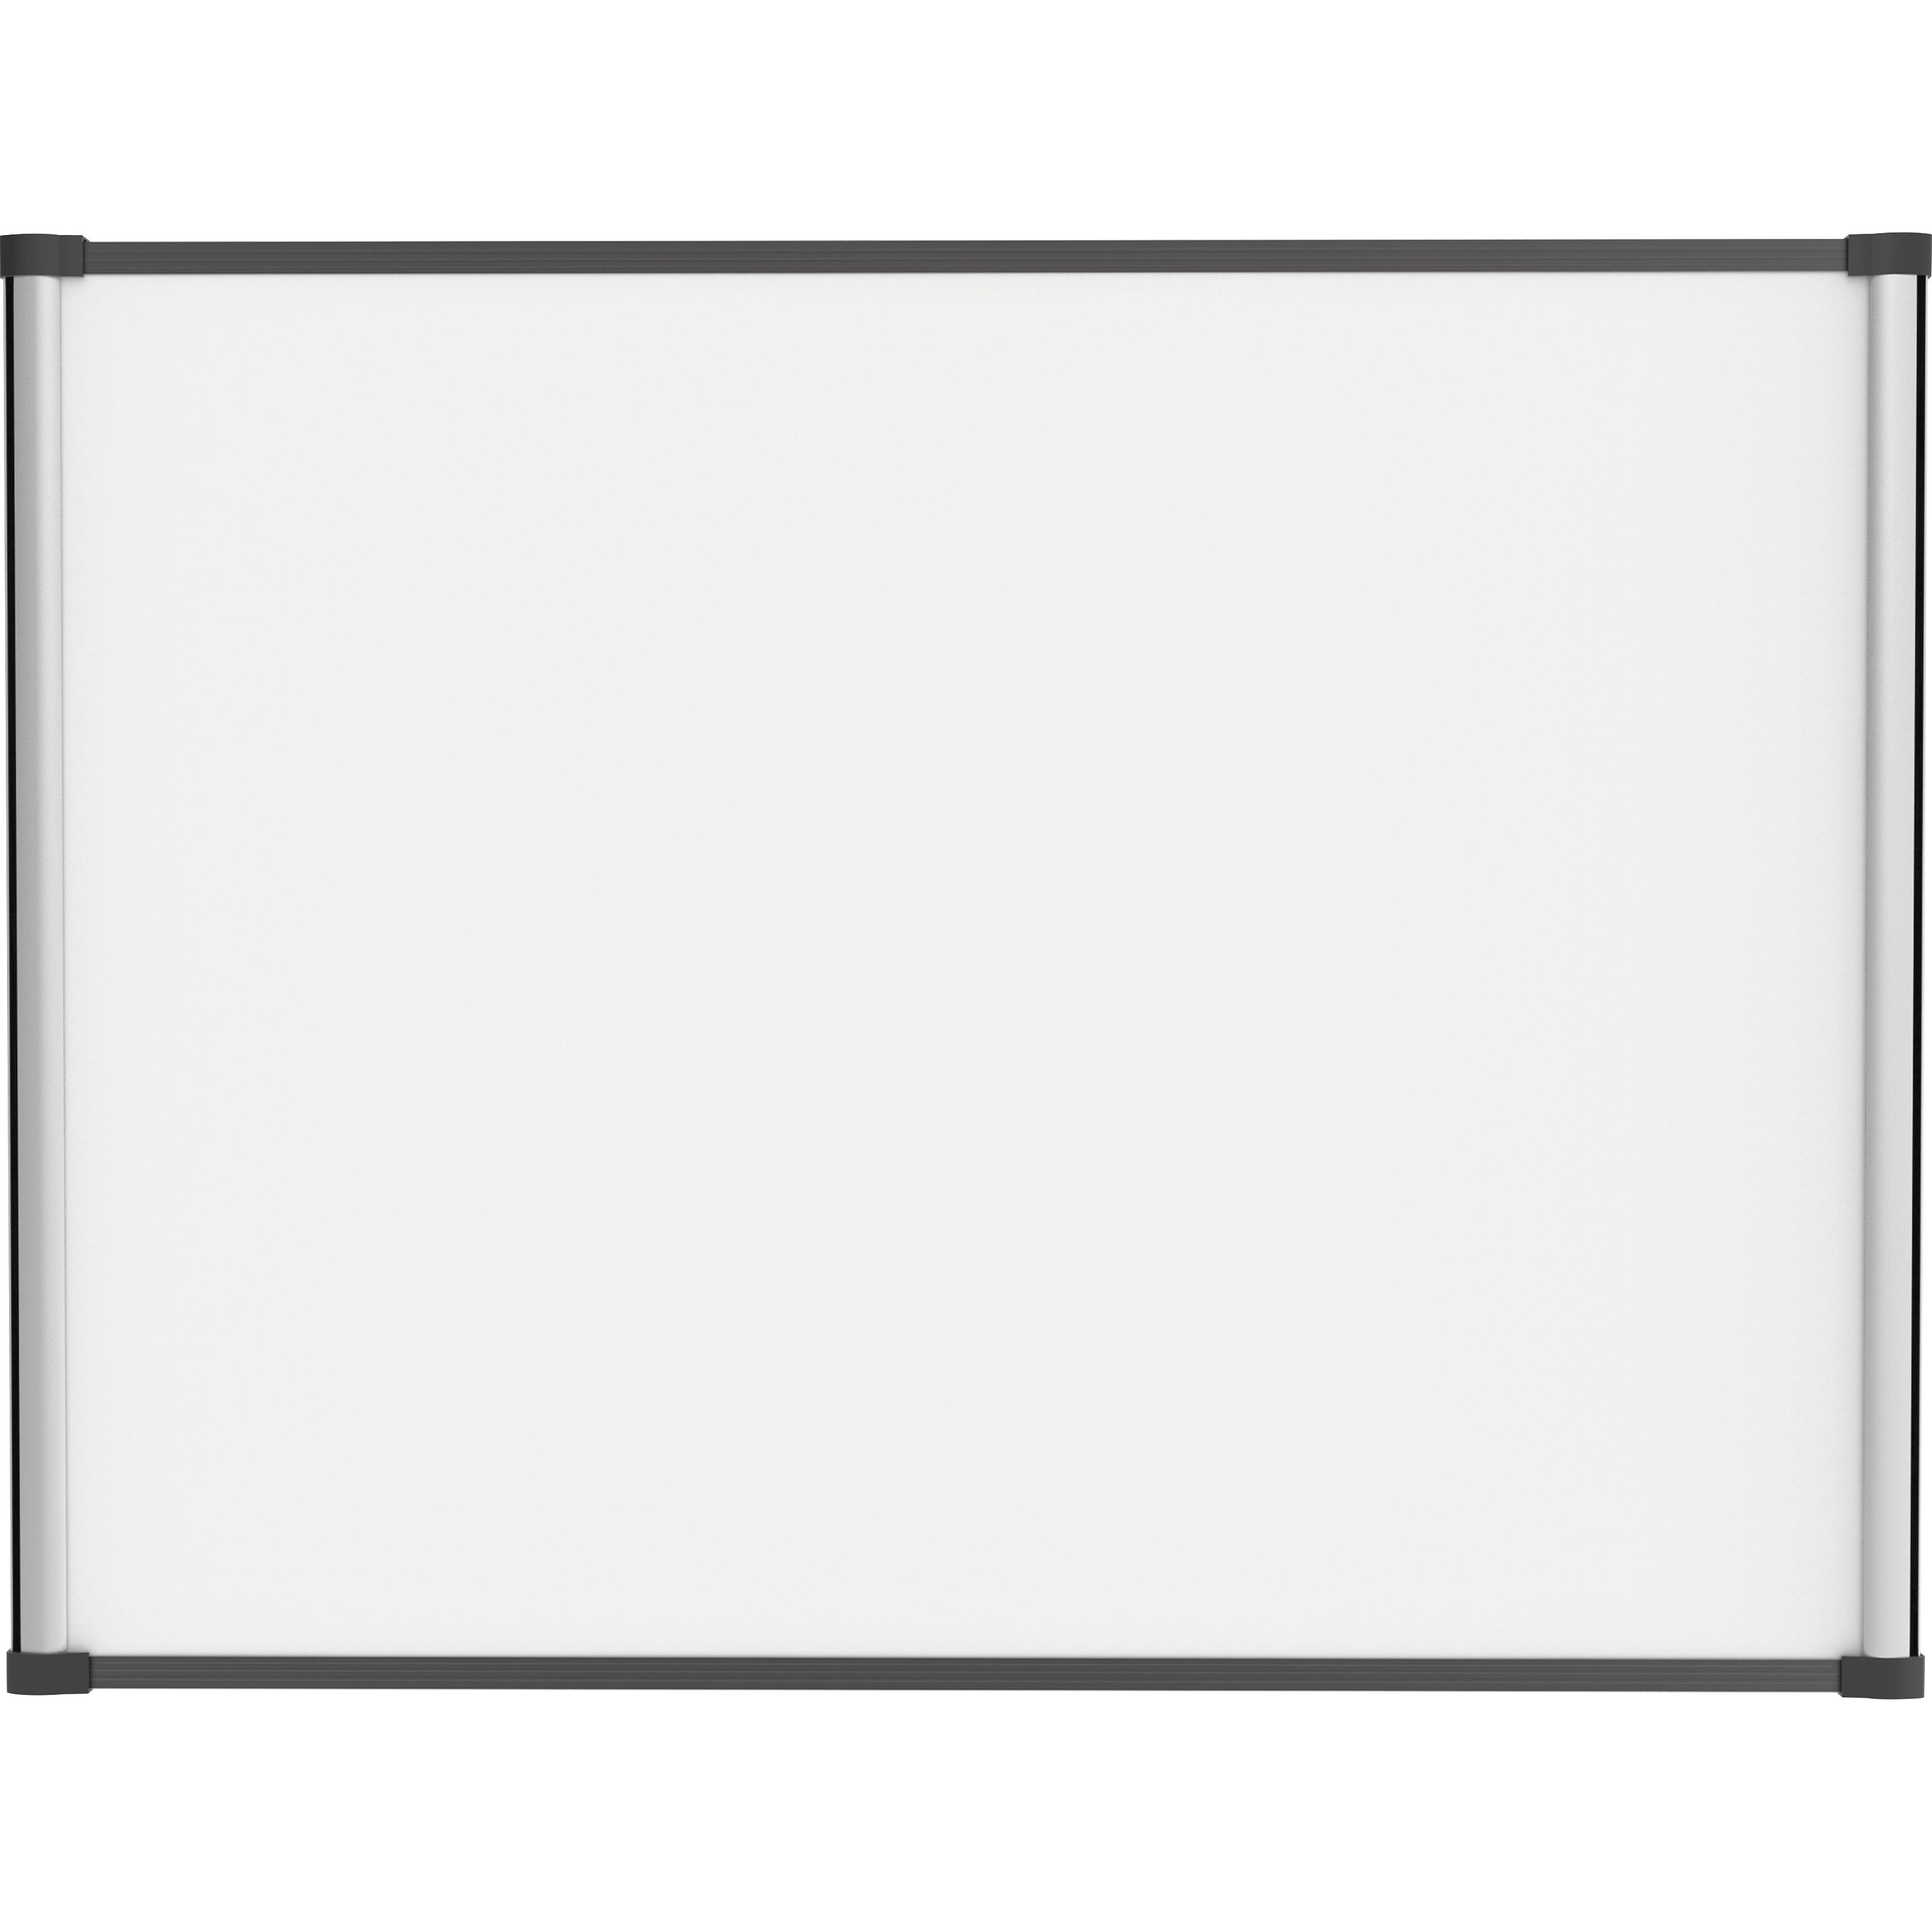 Lorell Magnetic Dry-erase Board - 48" (4 ft) Width x 36" (3 ft) Height - Aluminum Steel Frame - Rectangle - Magnetic - Marker Tray - 1 Each - 